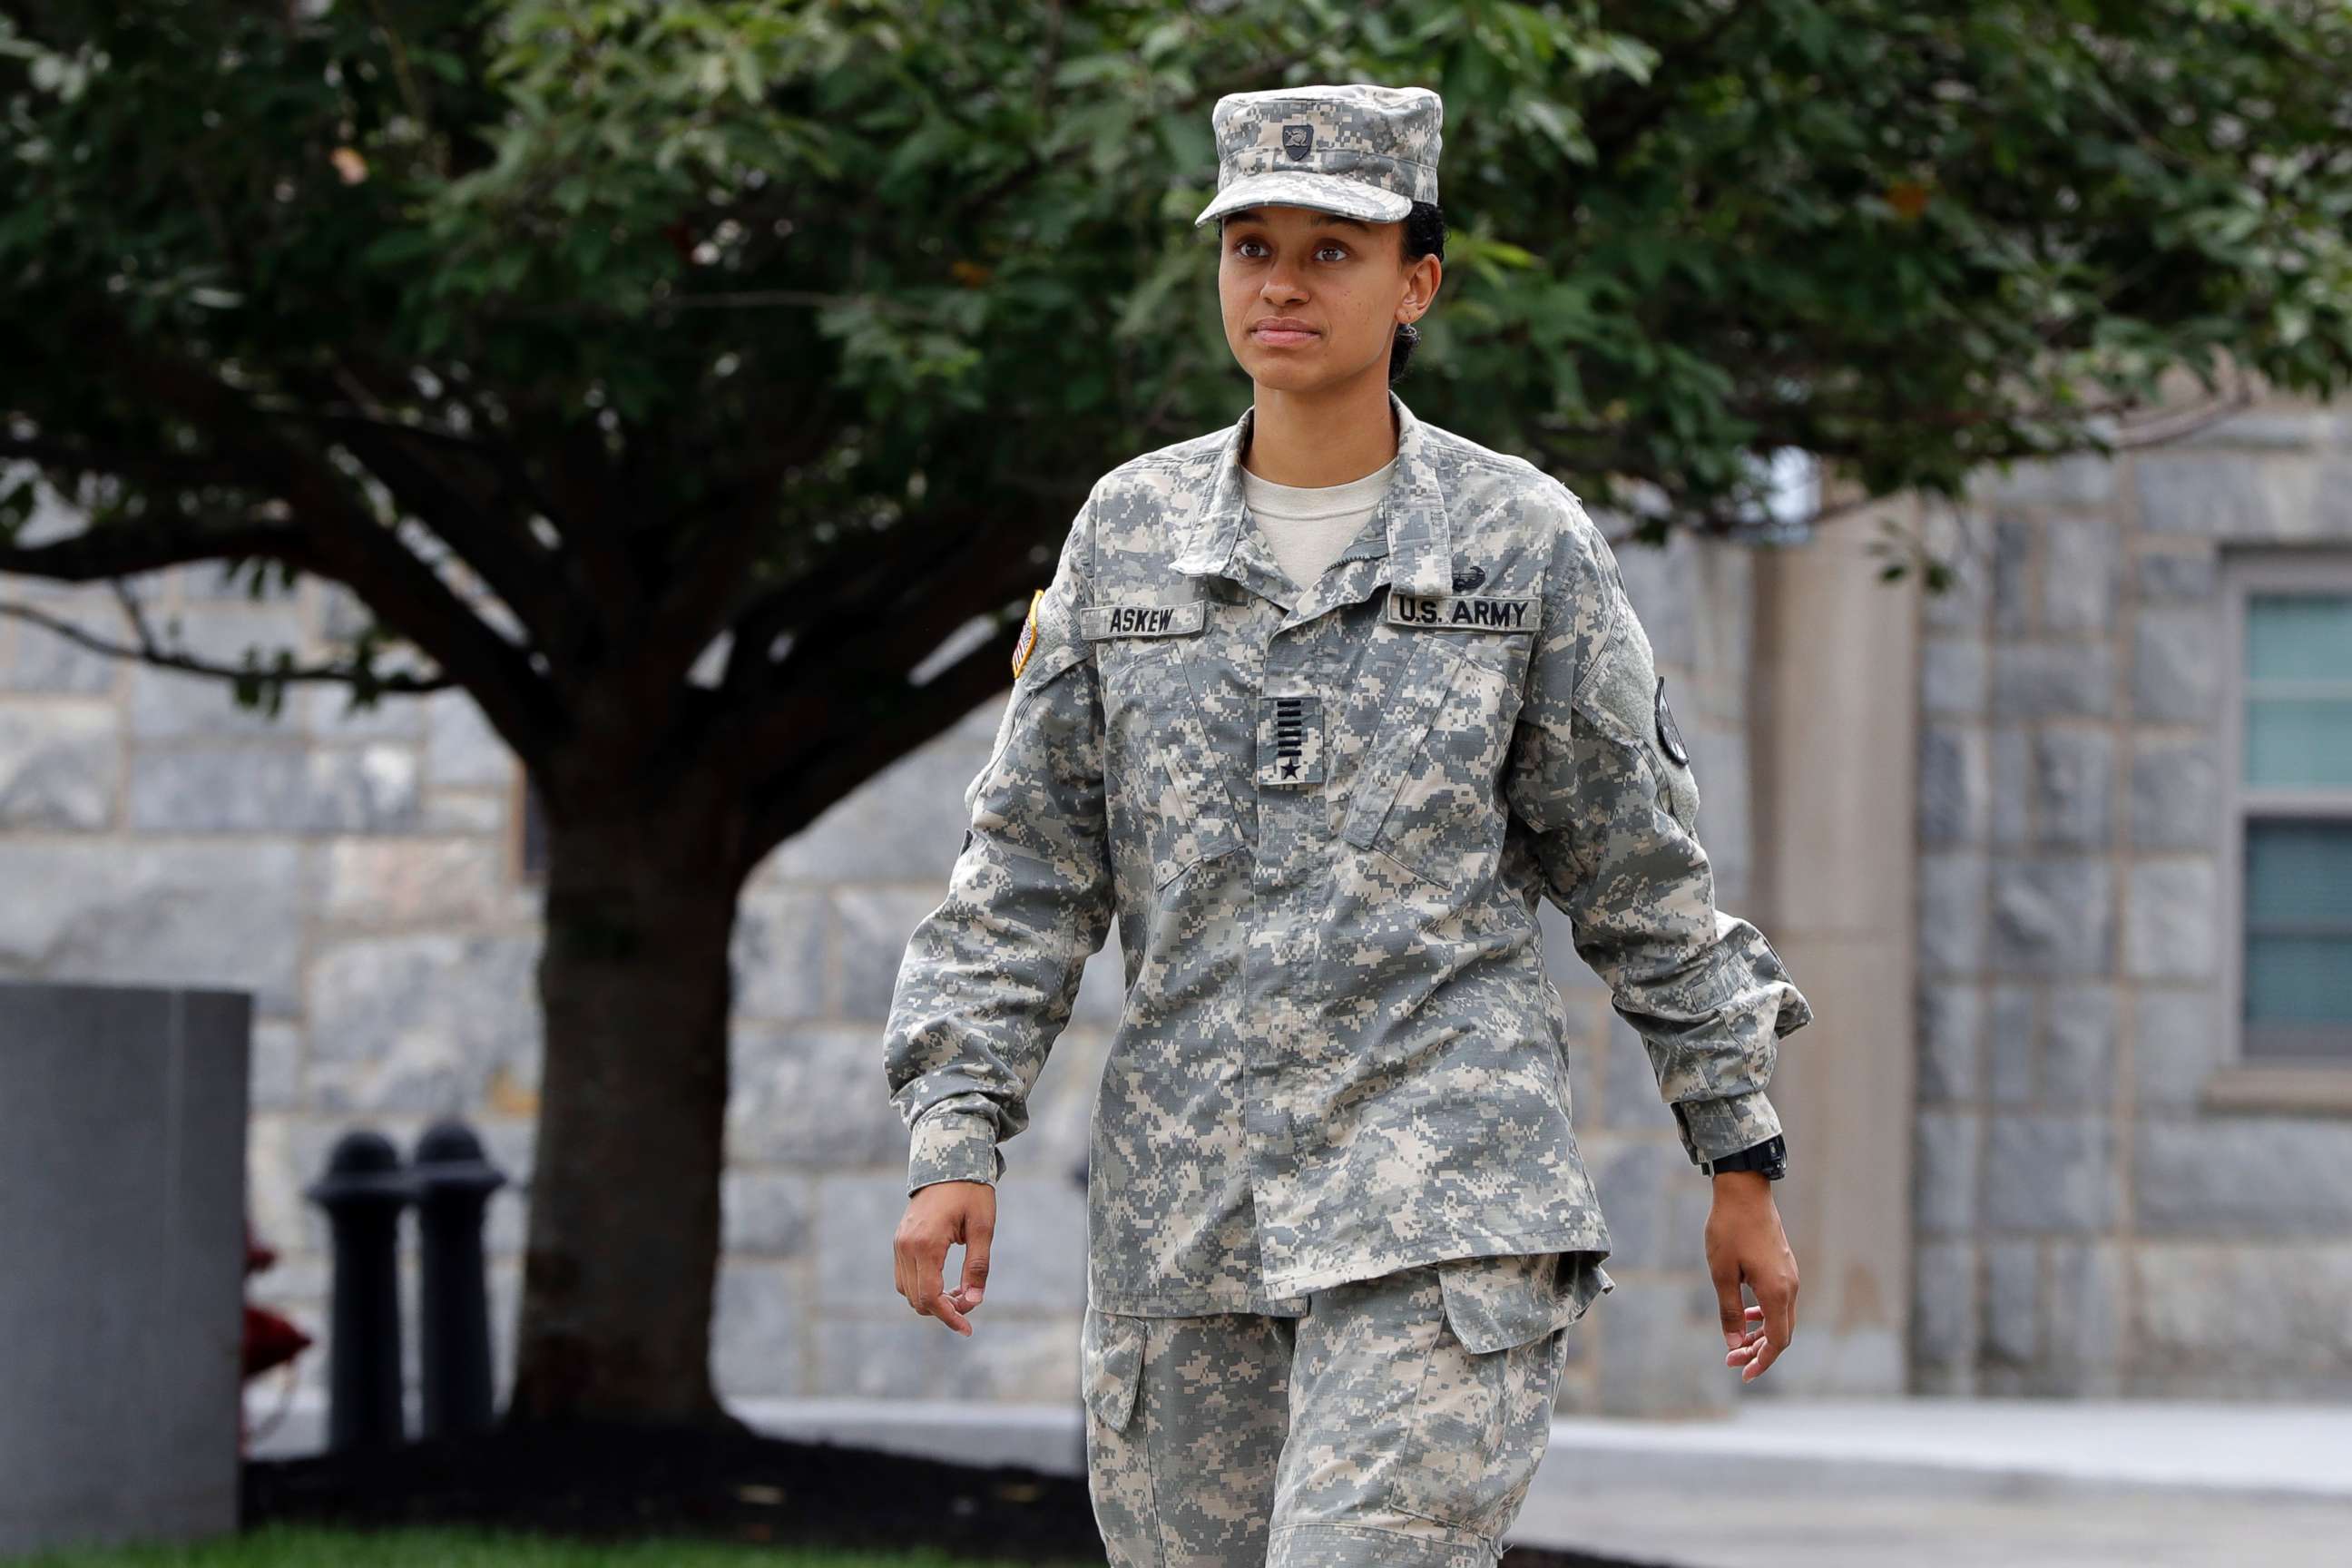 PHOTO: Cadet Simone Askew, who has been selected first captain of the U.S. Military Academy Corps of Cadets for the upcoming academic year, in West Point, Aug. 14, 2017.